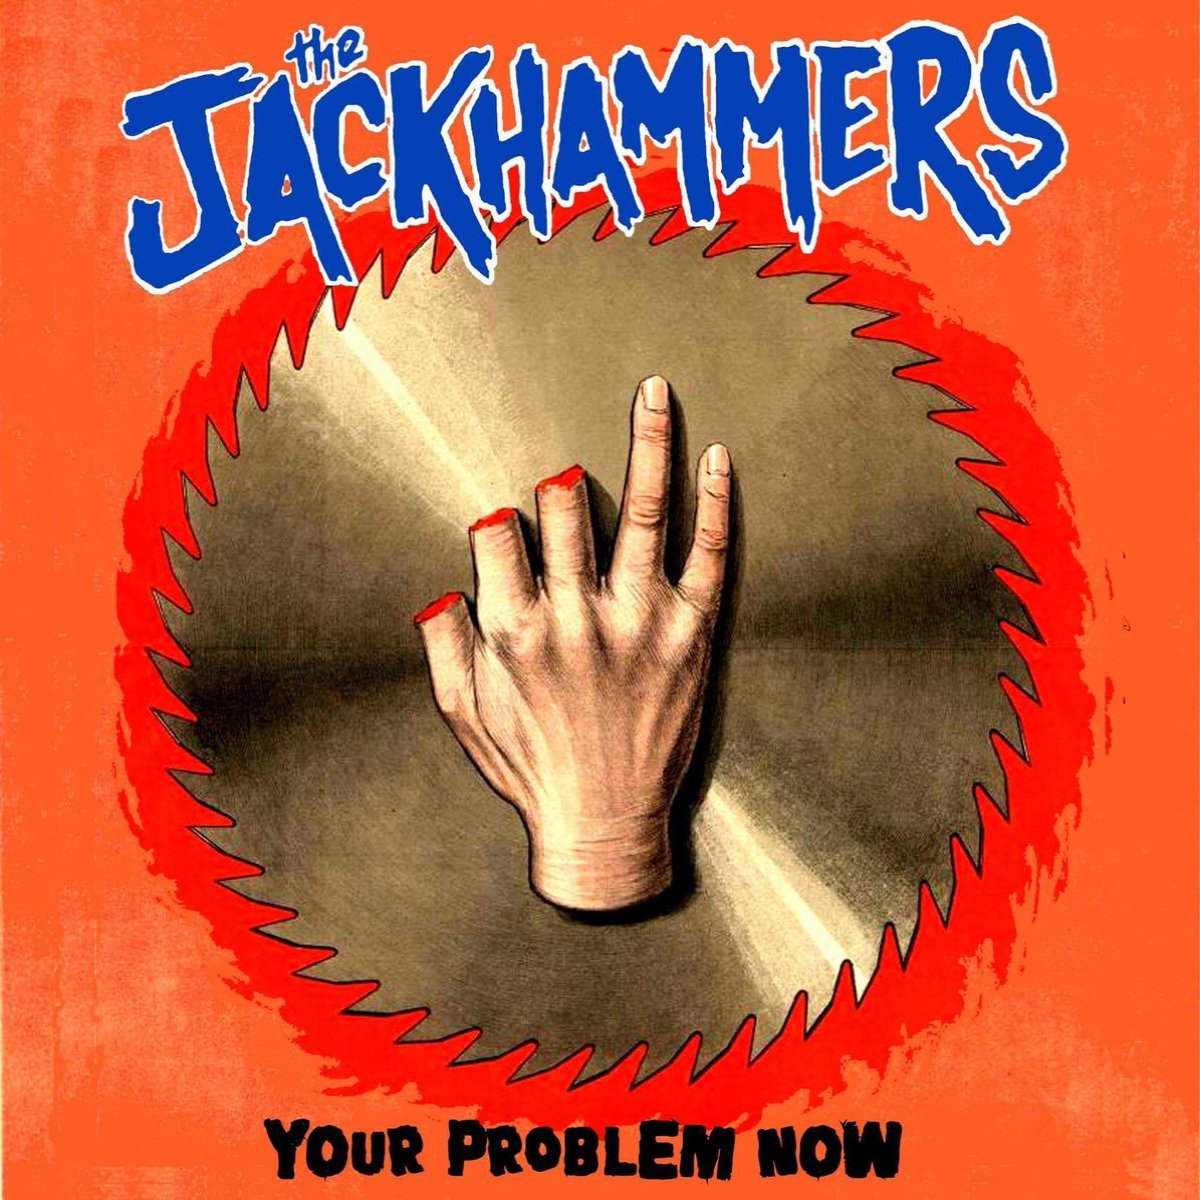 Jackhammers- Your Problem Now 7” ~BUZZSAW COVER LTD TO 100!